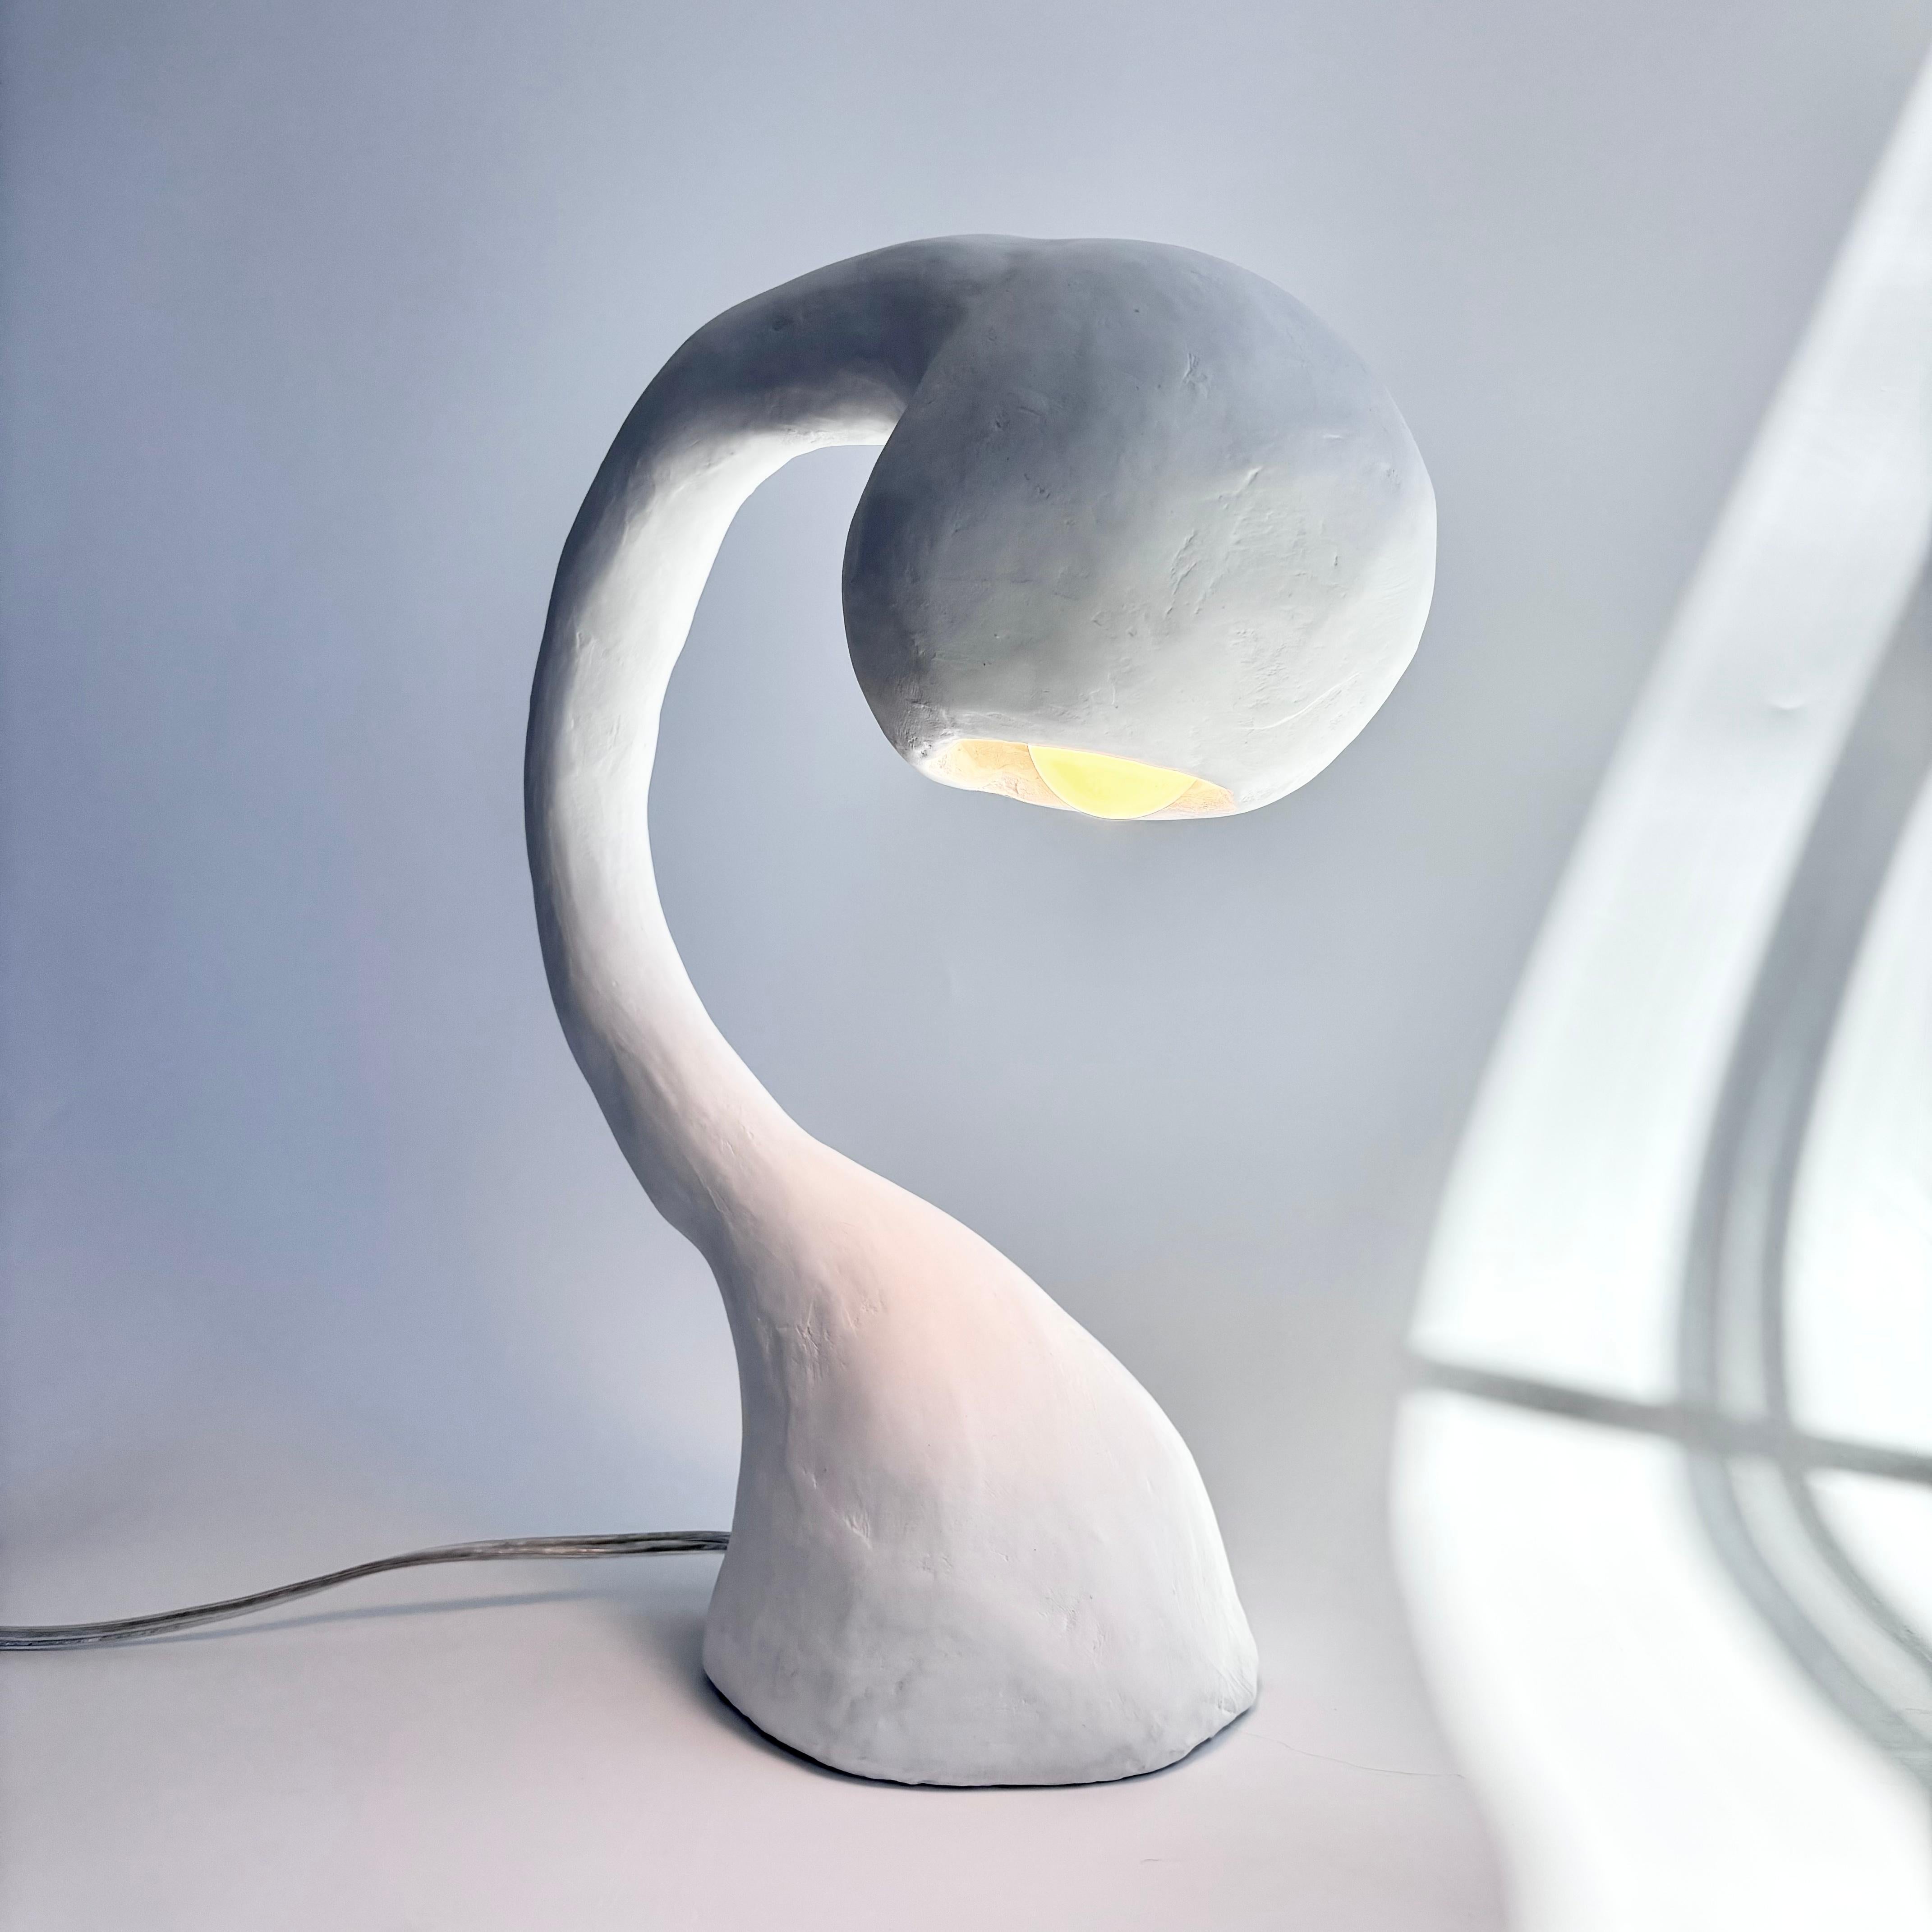 Designed by Studio Chora, 2024.
Biomorphic: ‘bios' meaning life and 'morphe' meaning form. 

The Biomorphic series of organic light sculptures are one-of-a-kind and crafted by hand. This is a second-generation light sculpture, more durable than